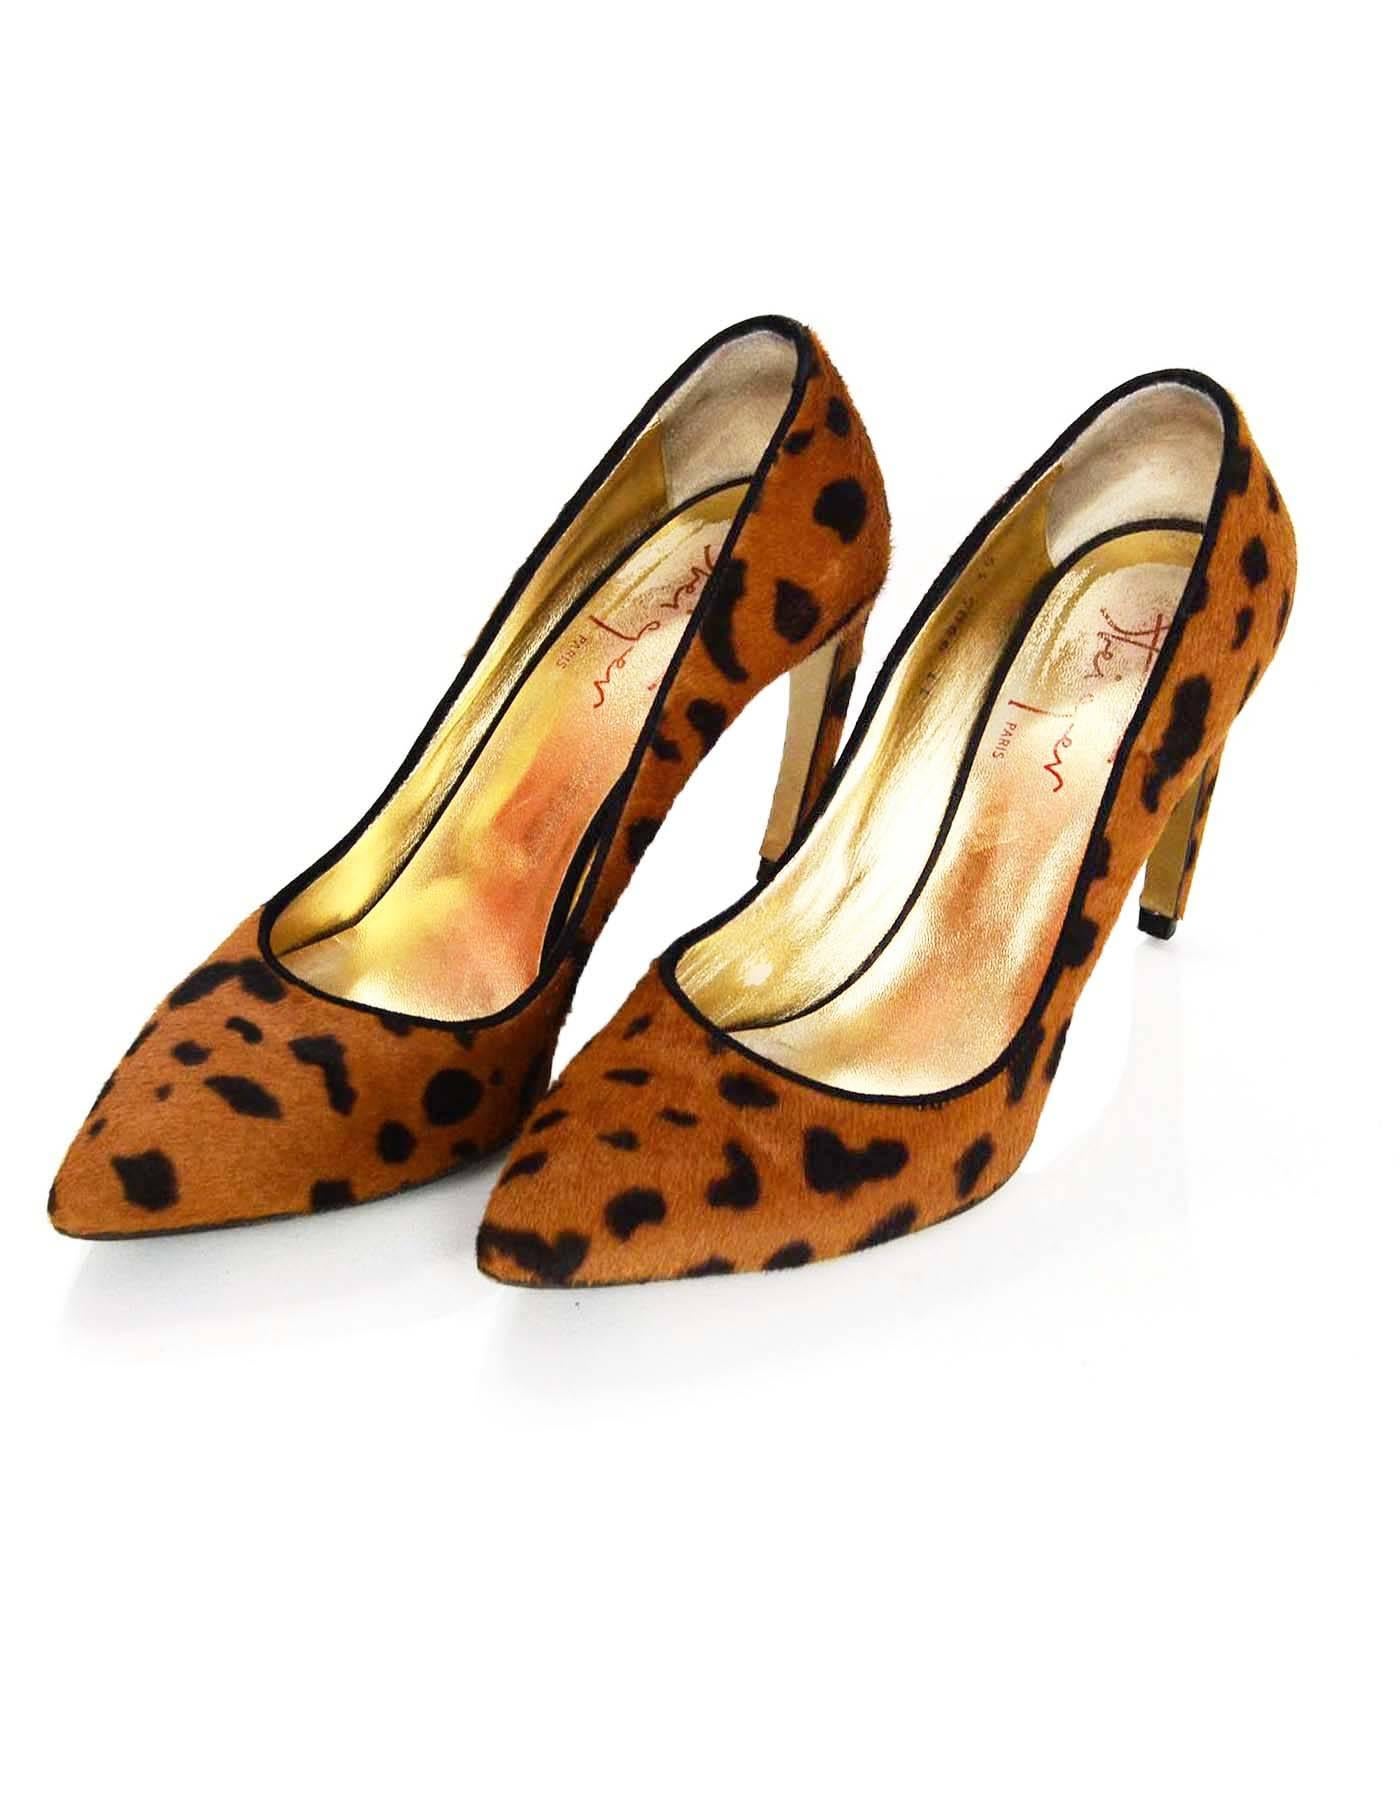 Walter Steiger Leopard Ponyhair Pumps Sz 39

Color: Brown
Materials: Ponyhair
Closure/Opening: Slide on
Sole Stamp: Walter Steiger
Overall Condition: Excellent pre-owned condition with the exception of light wear at insoles and outsoles

Marked